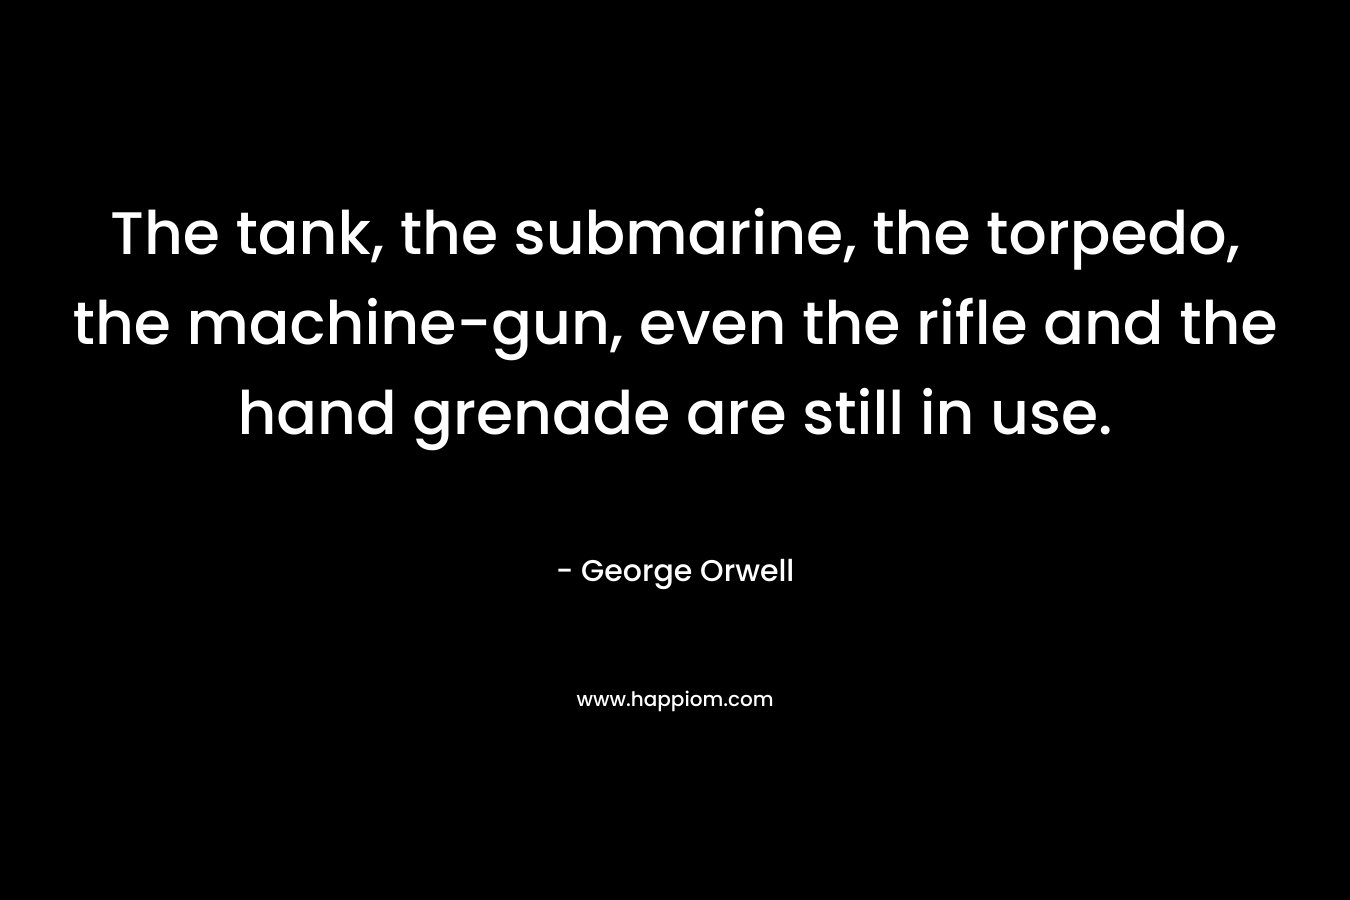 The tank, the submarine, the torpedo, the machine-gun, even the rifle and the hand grenade are still in use. – George Orwell